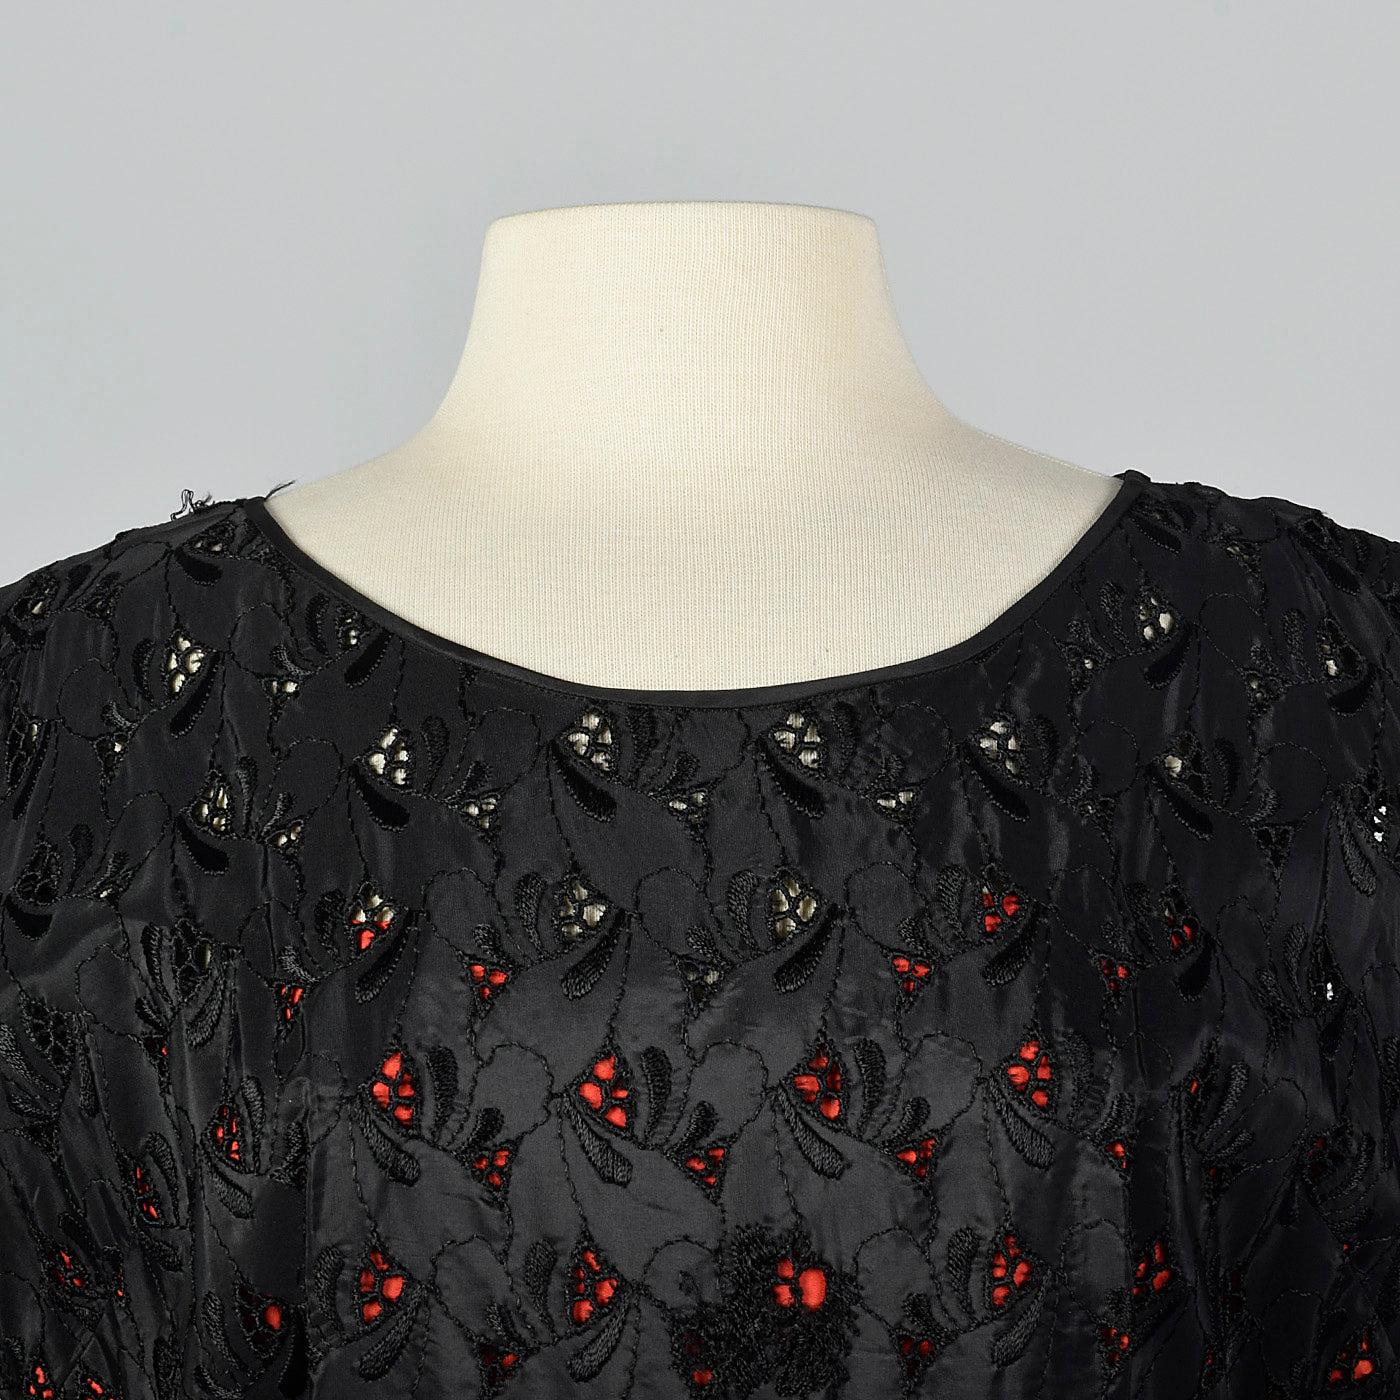 1950s Black Eyelet Dress with Red Lining